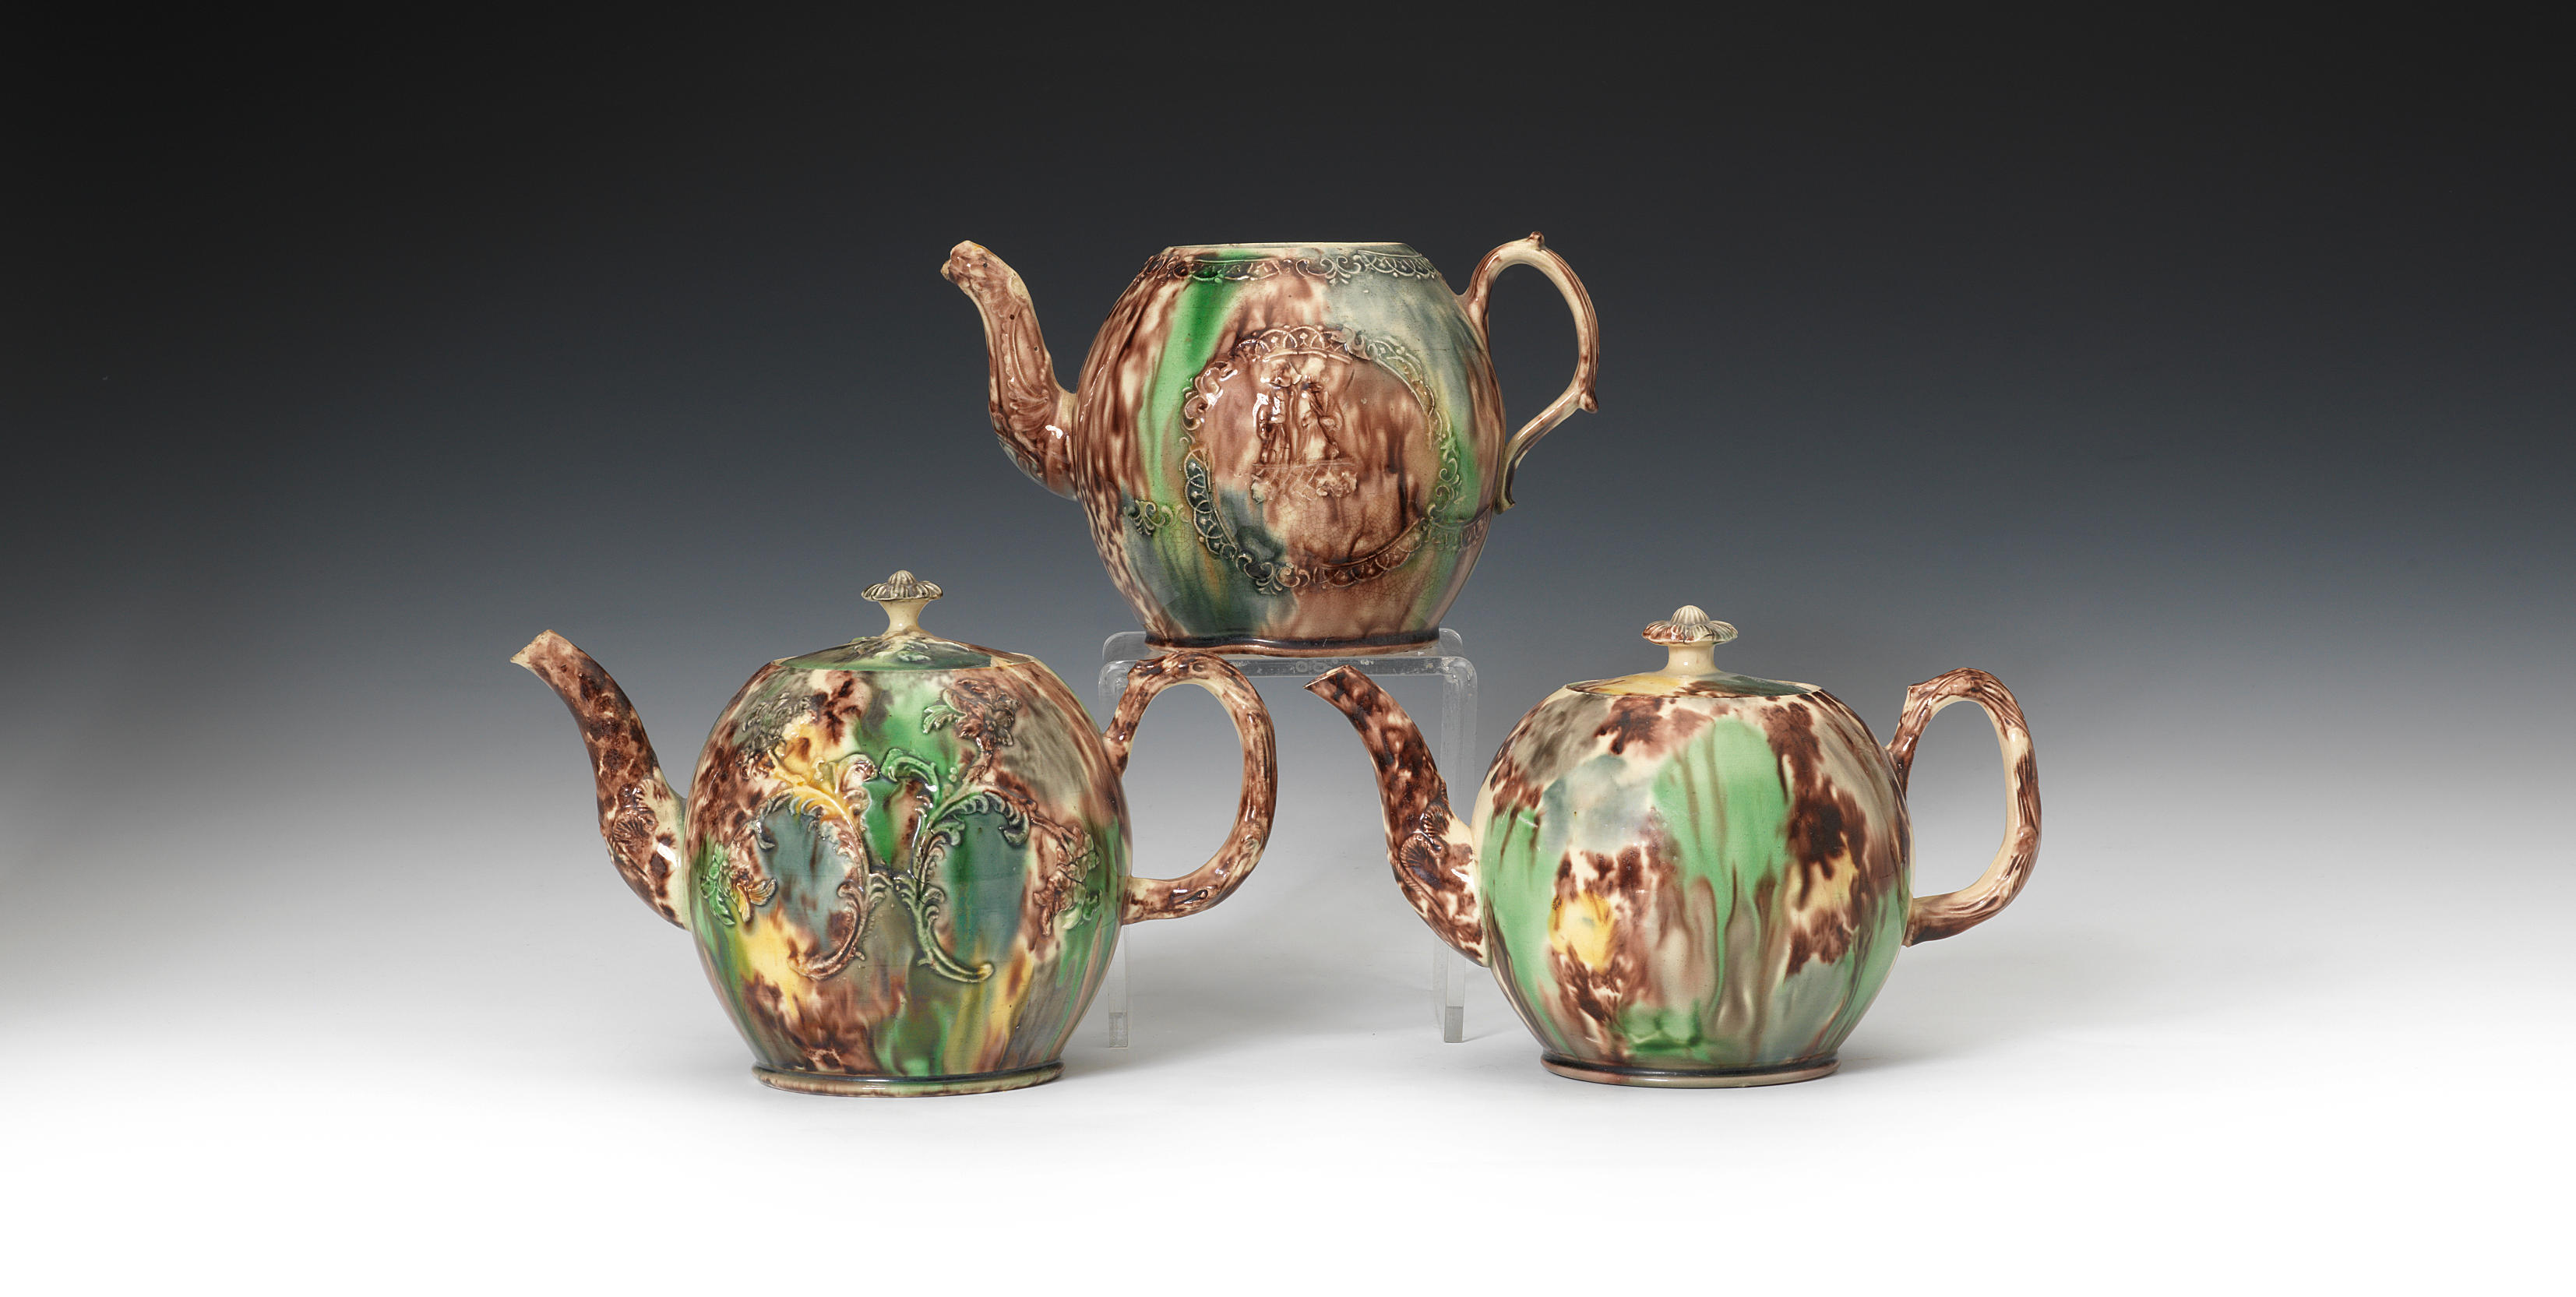 A William Greatbatch teapot and two Staffordshire lead-glazed teapots and...